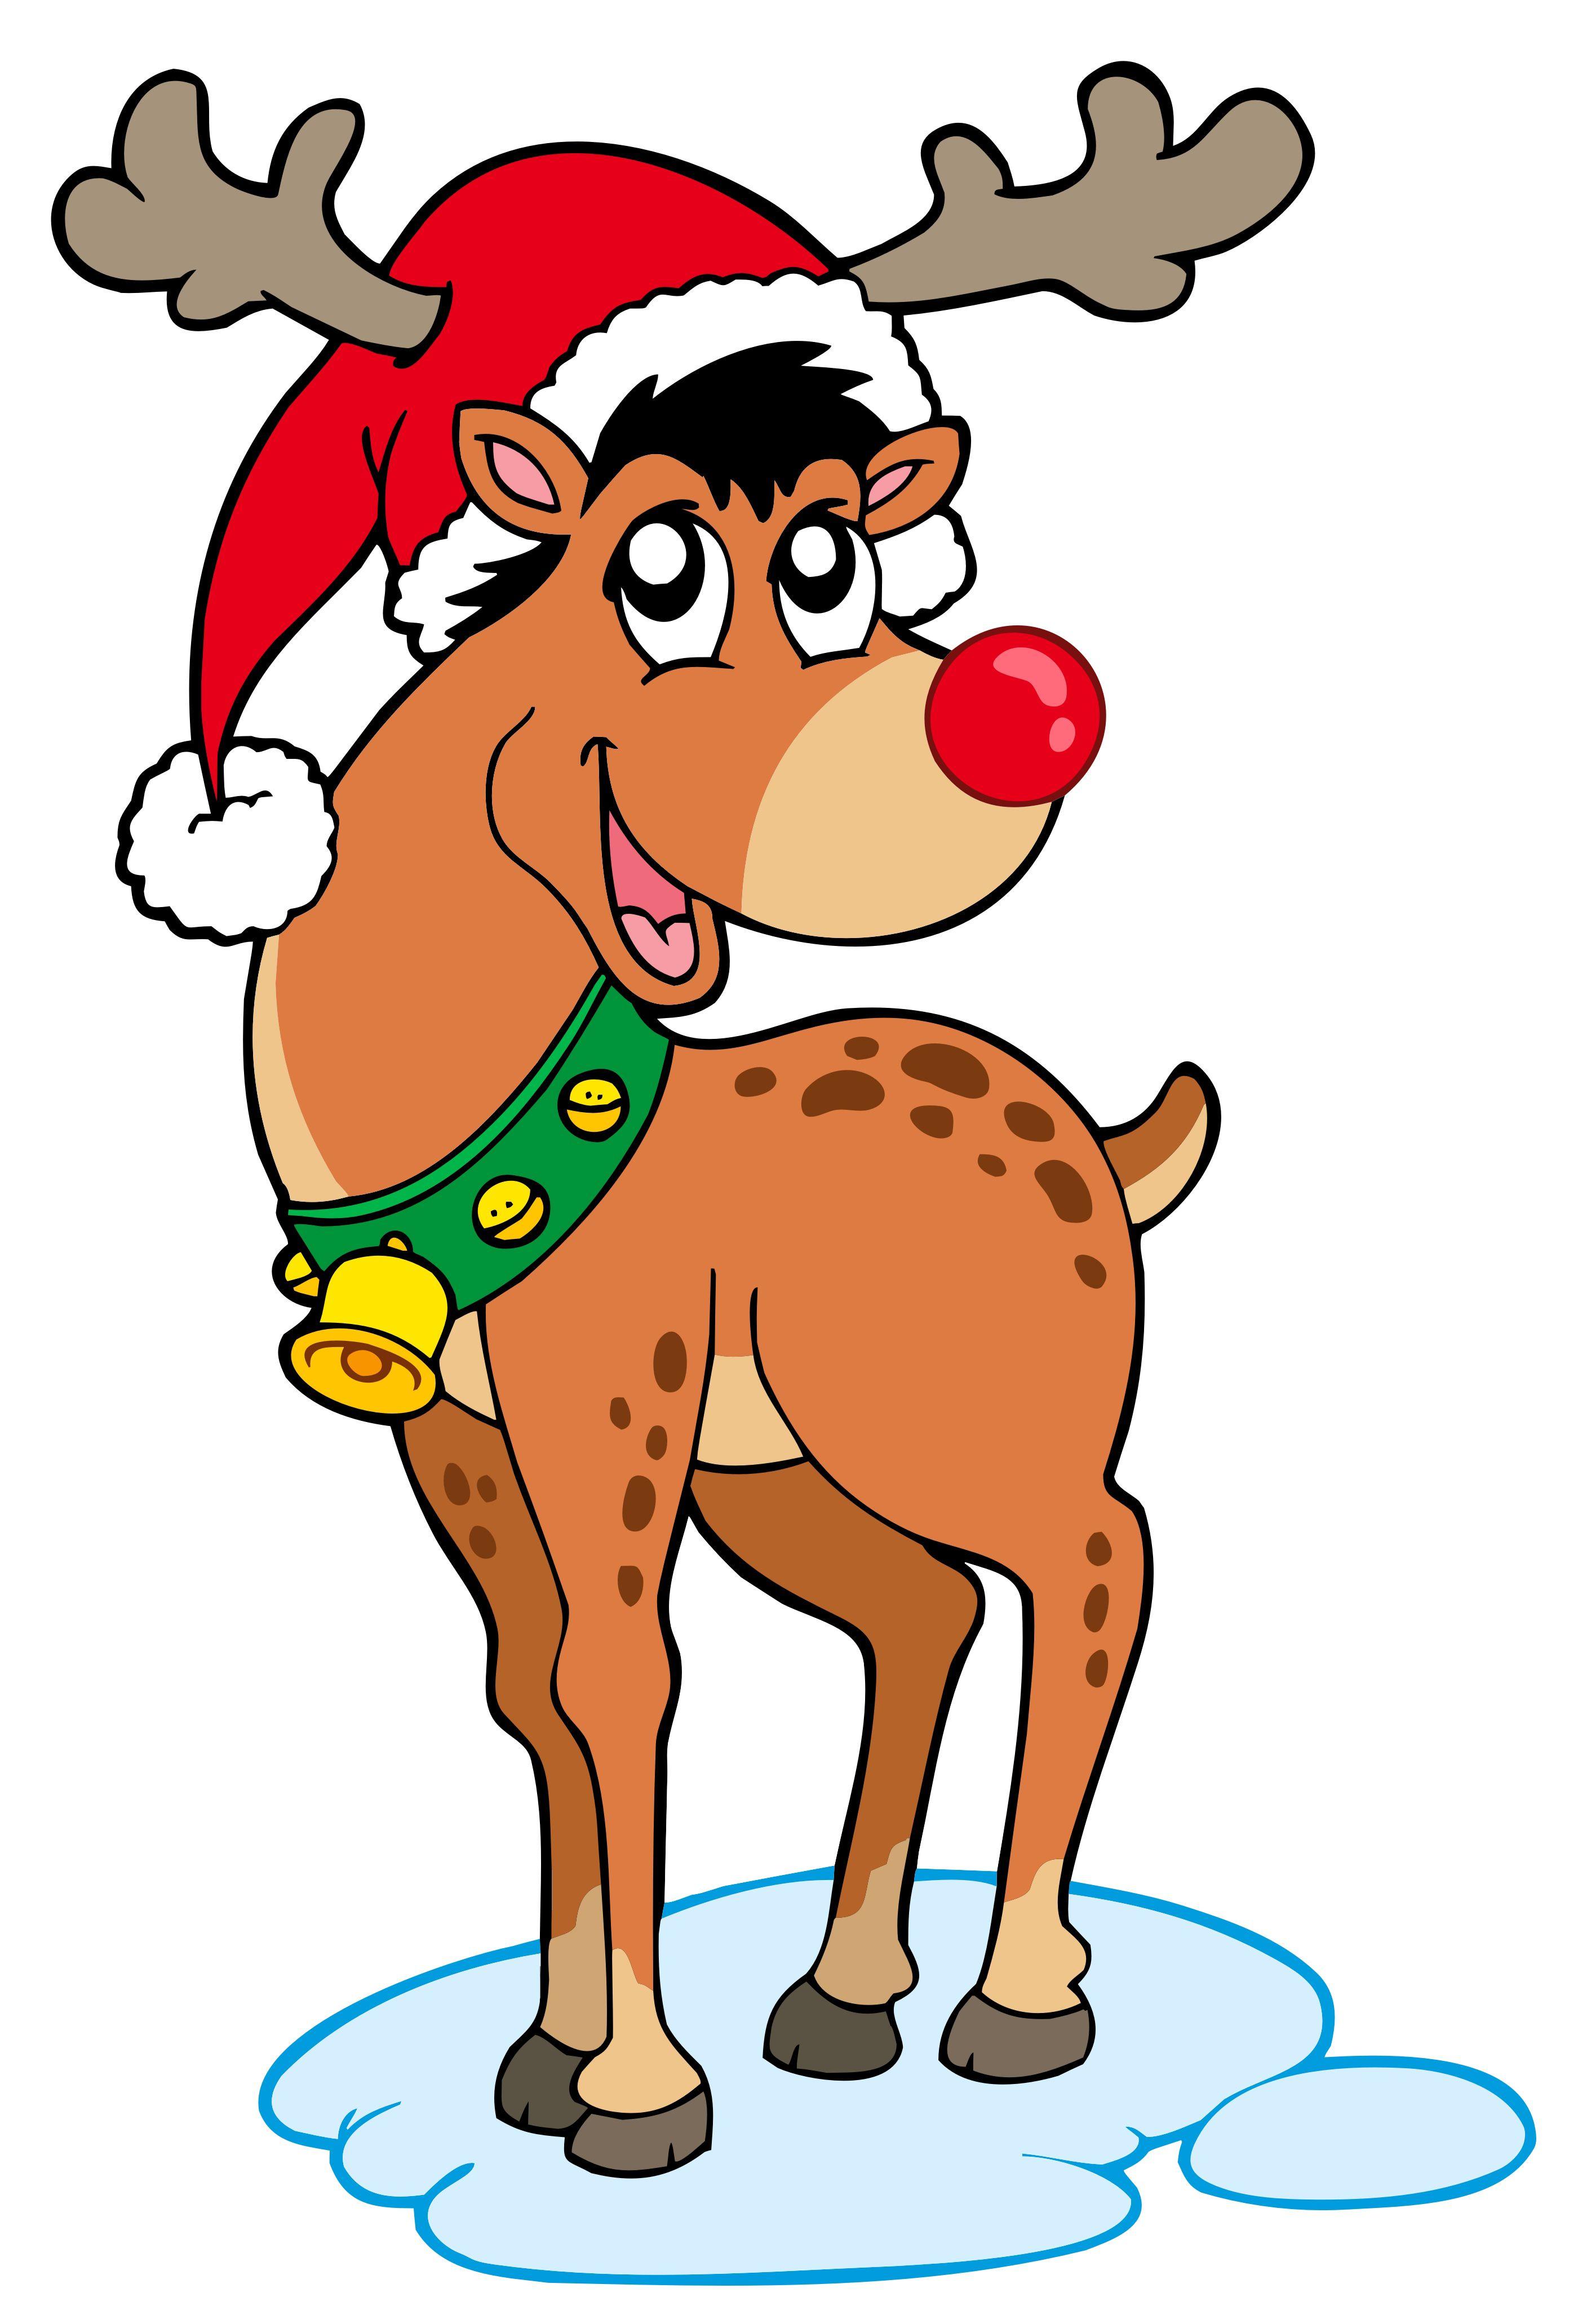 Rudolph The Red Nosed Reindeer Wallpaper 15085 HD